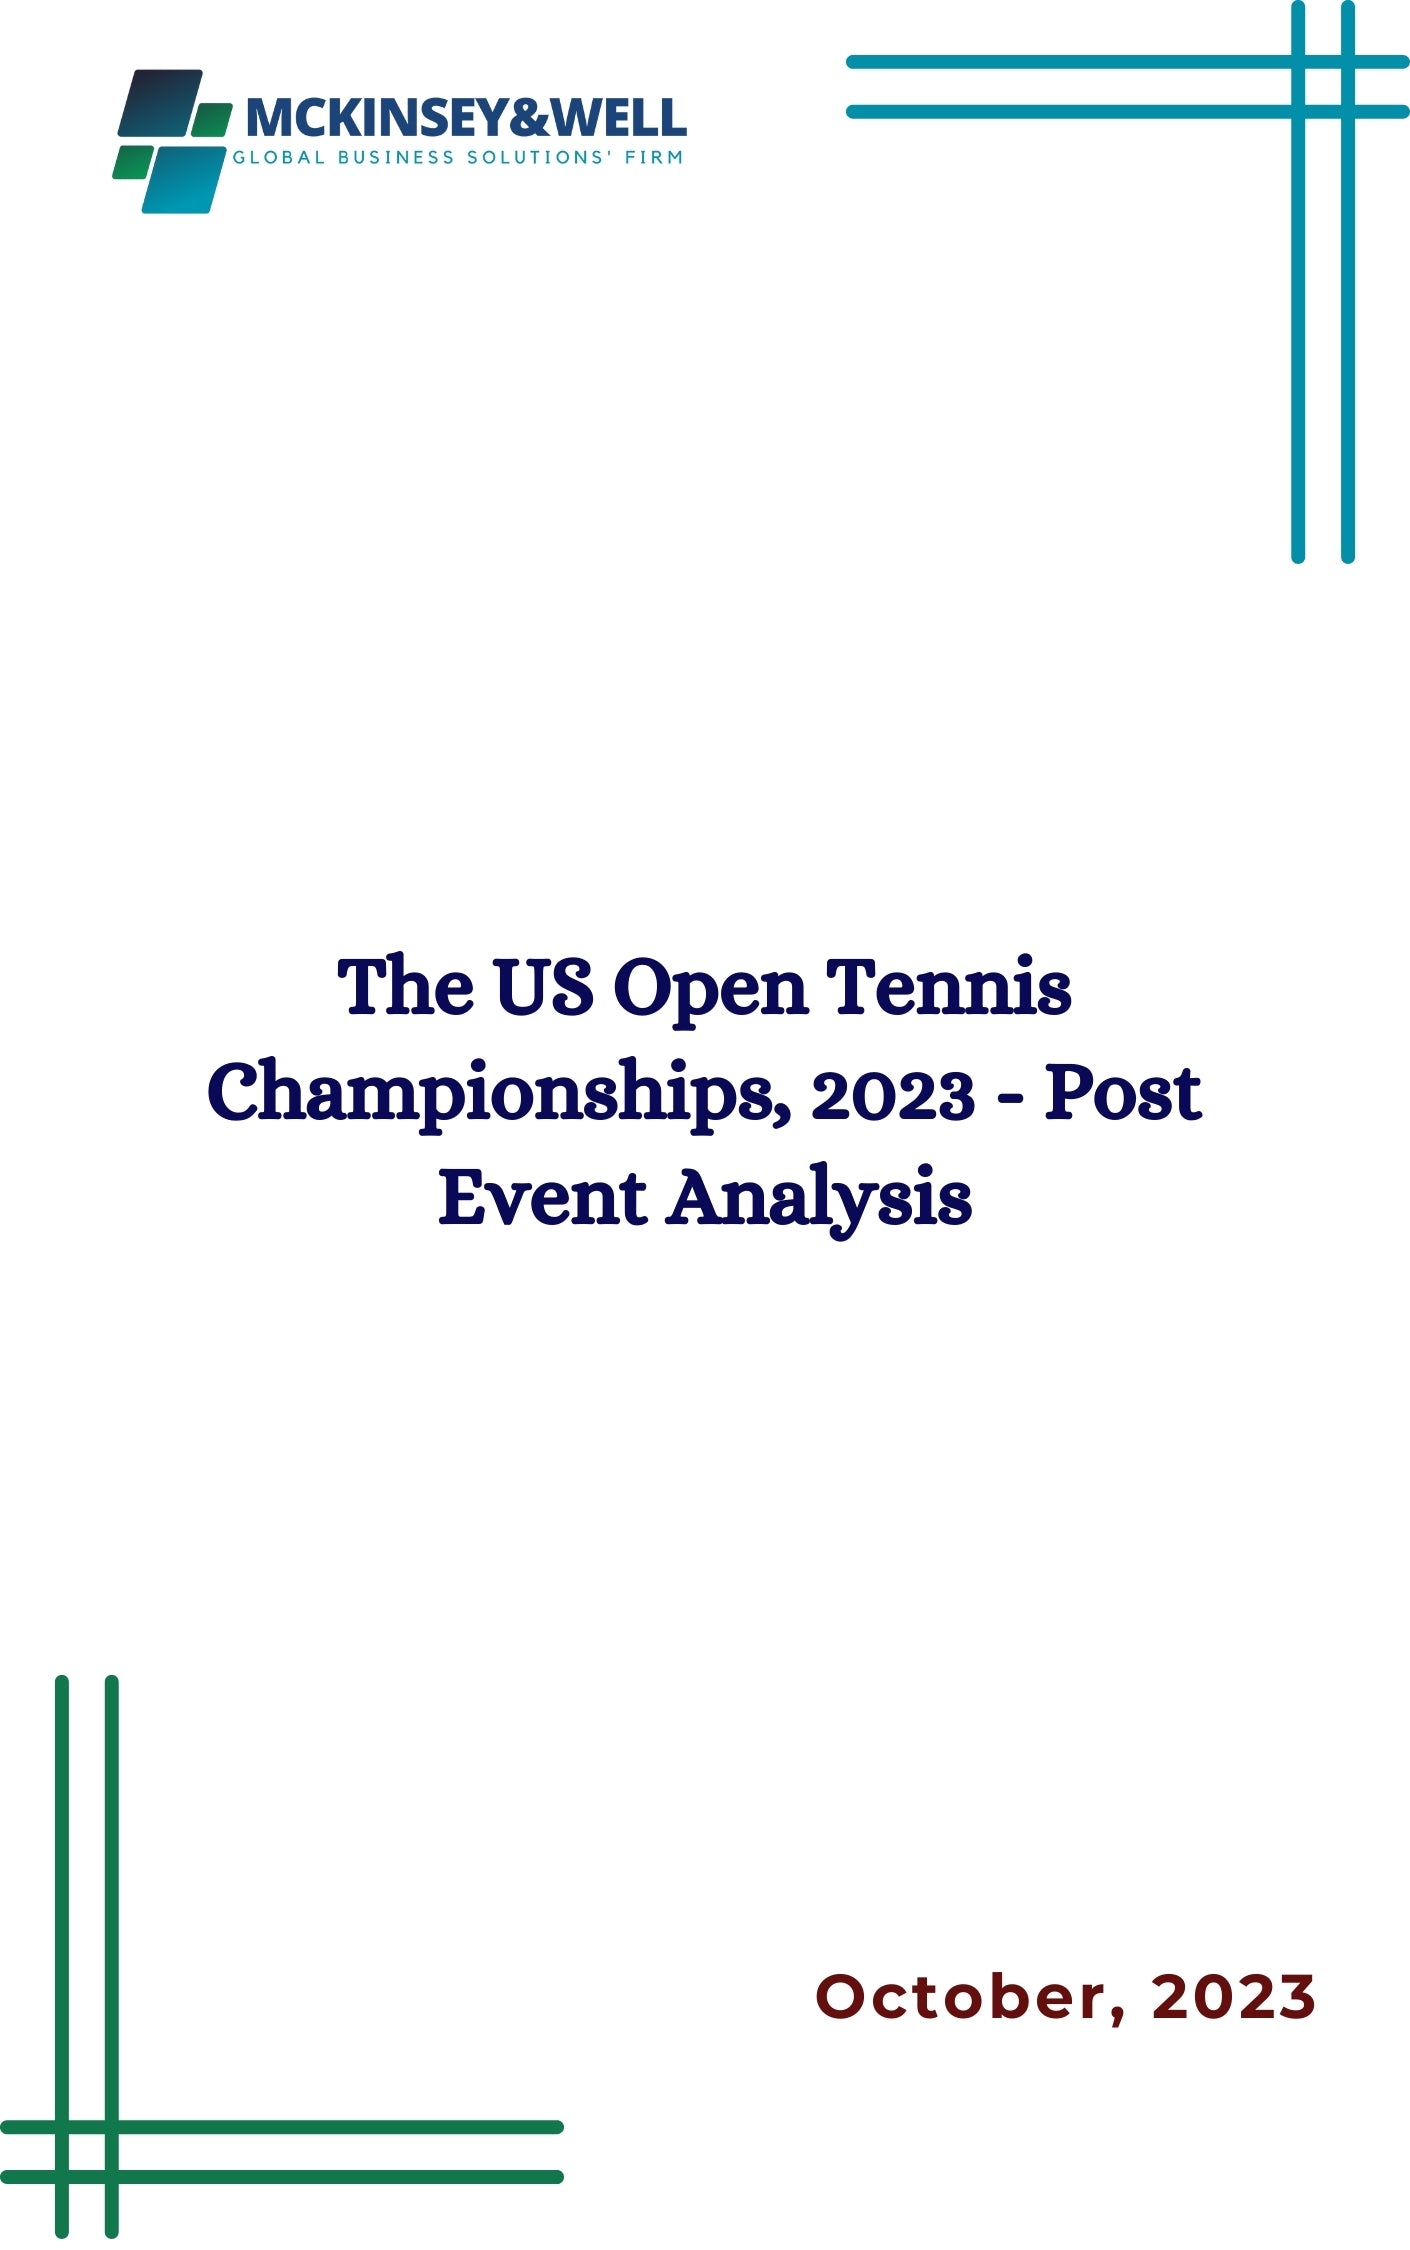 The US Open Tennis Championships, 2023 - Post Event Analysis